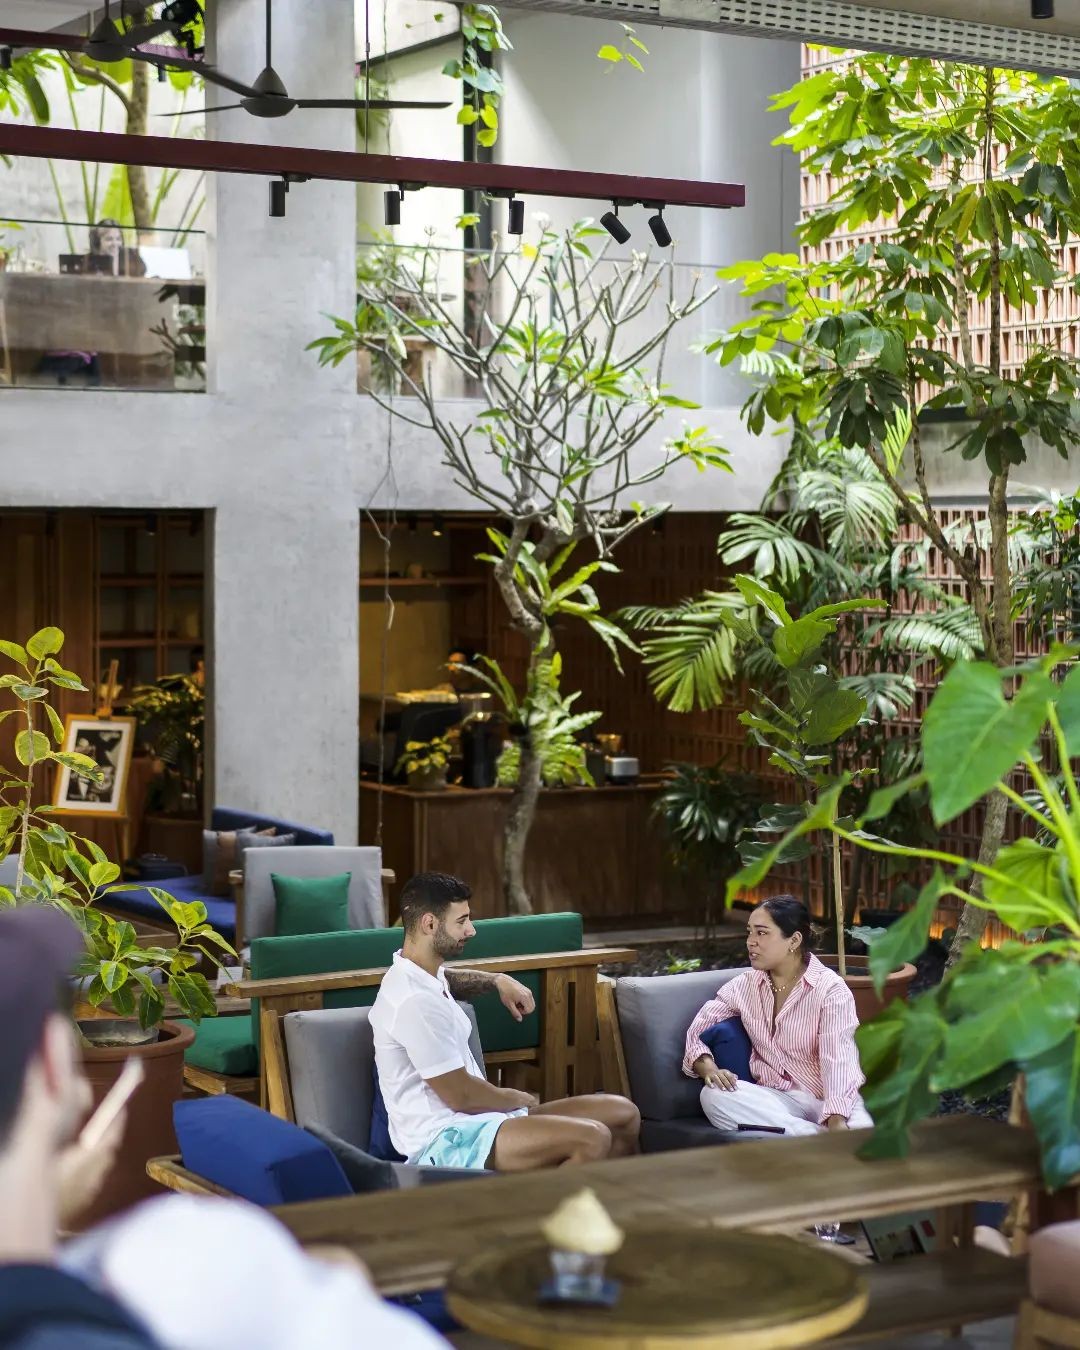 Spacious cafe with tall trees, hanging greenery, and wood detailing, overlooking a comfortable seating area.